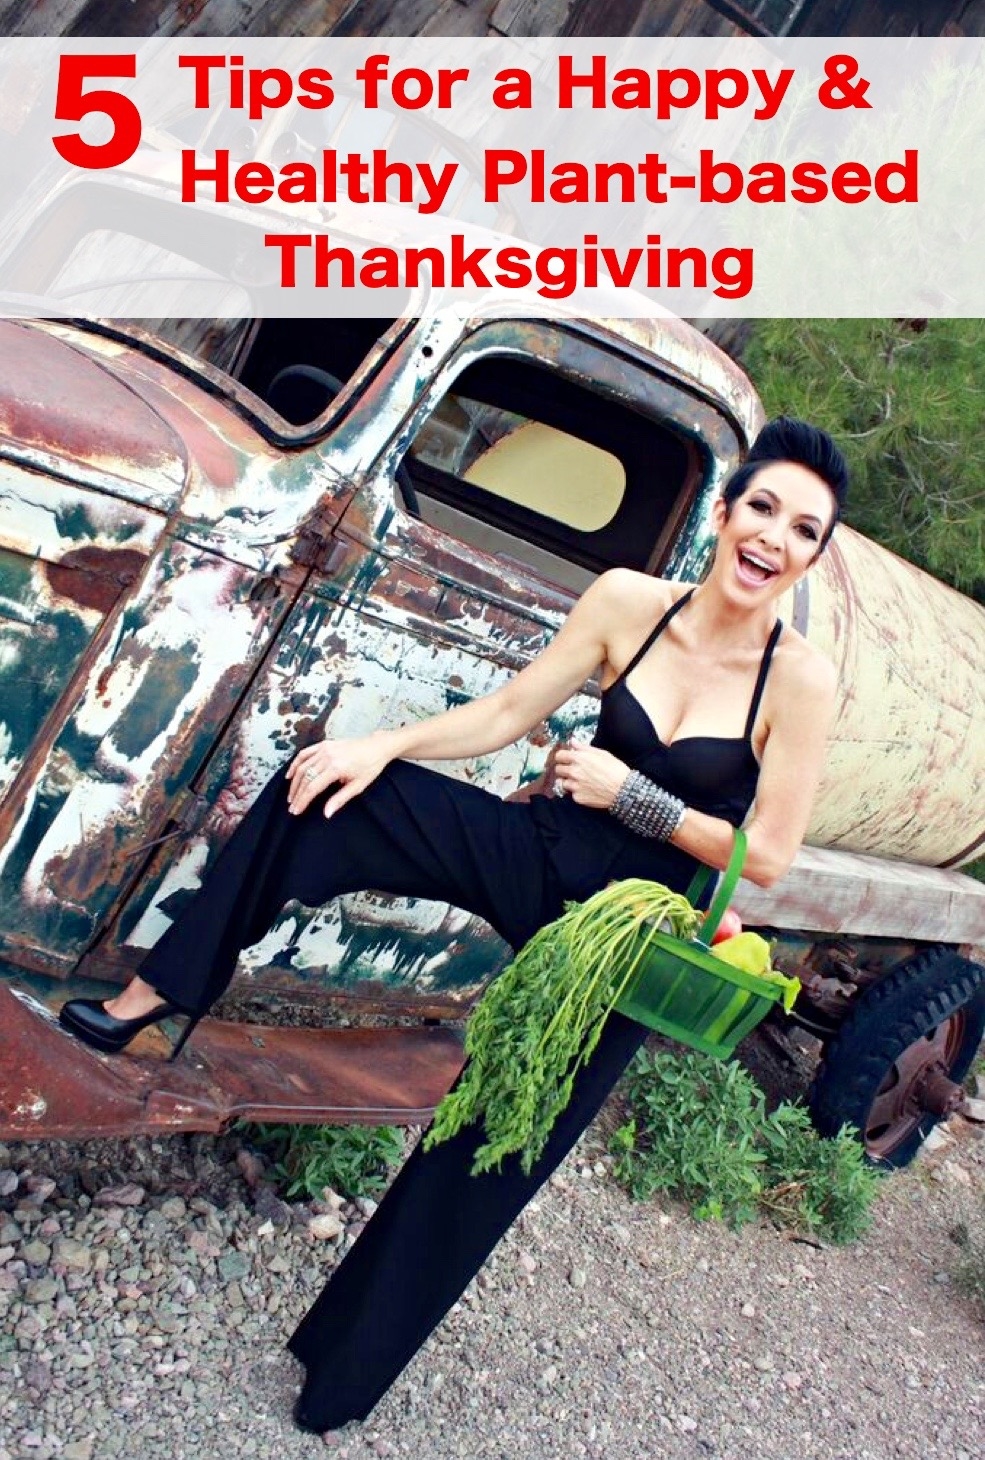 5 Tips for a Happy & Healthy Plant-Based Thanksgiving (As Featured on HuffingtonPost.Com)